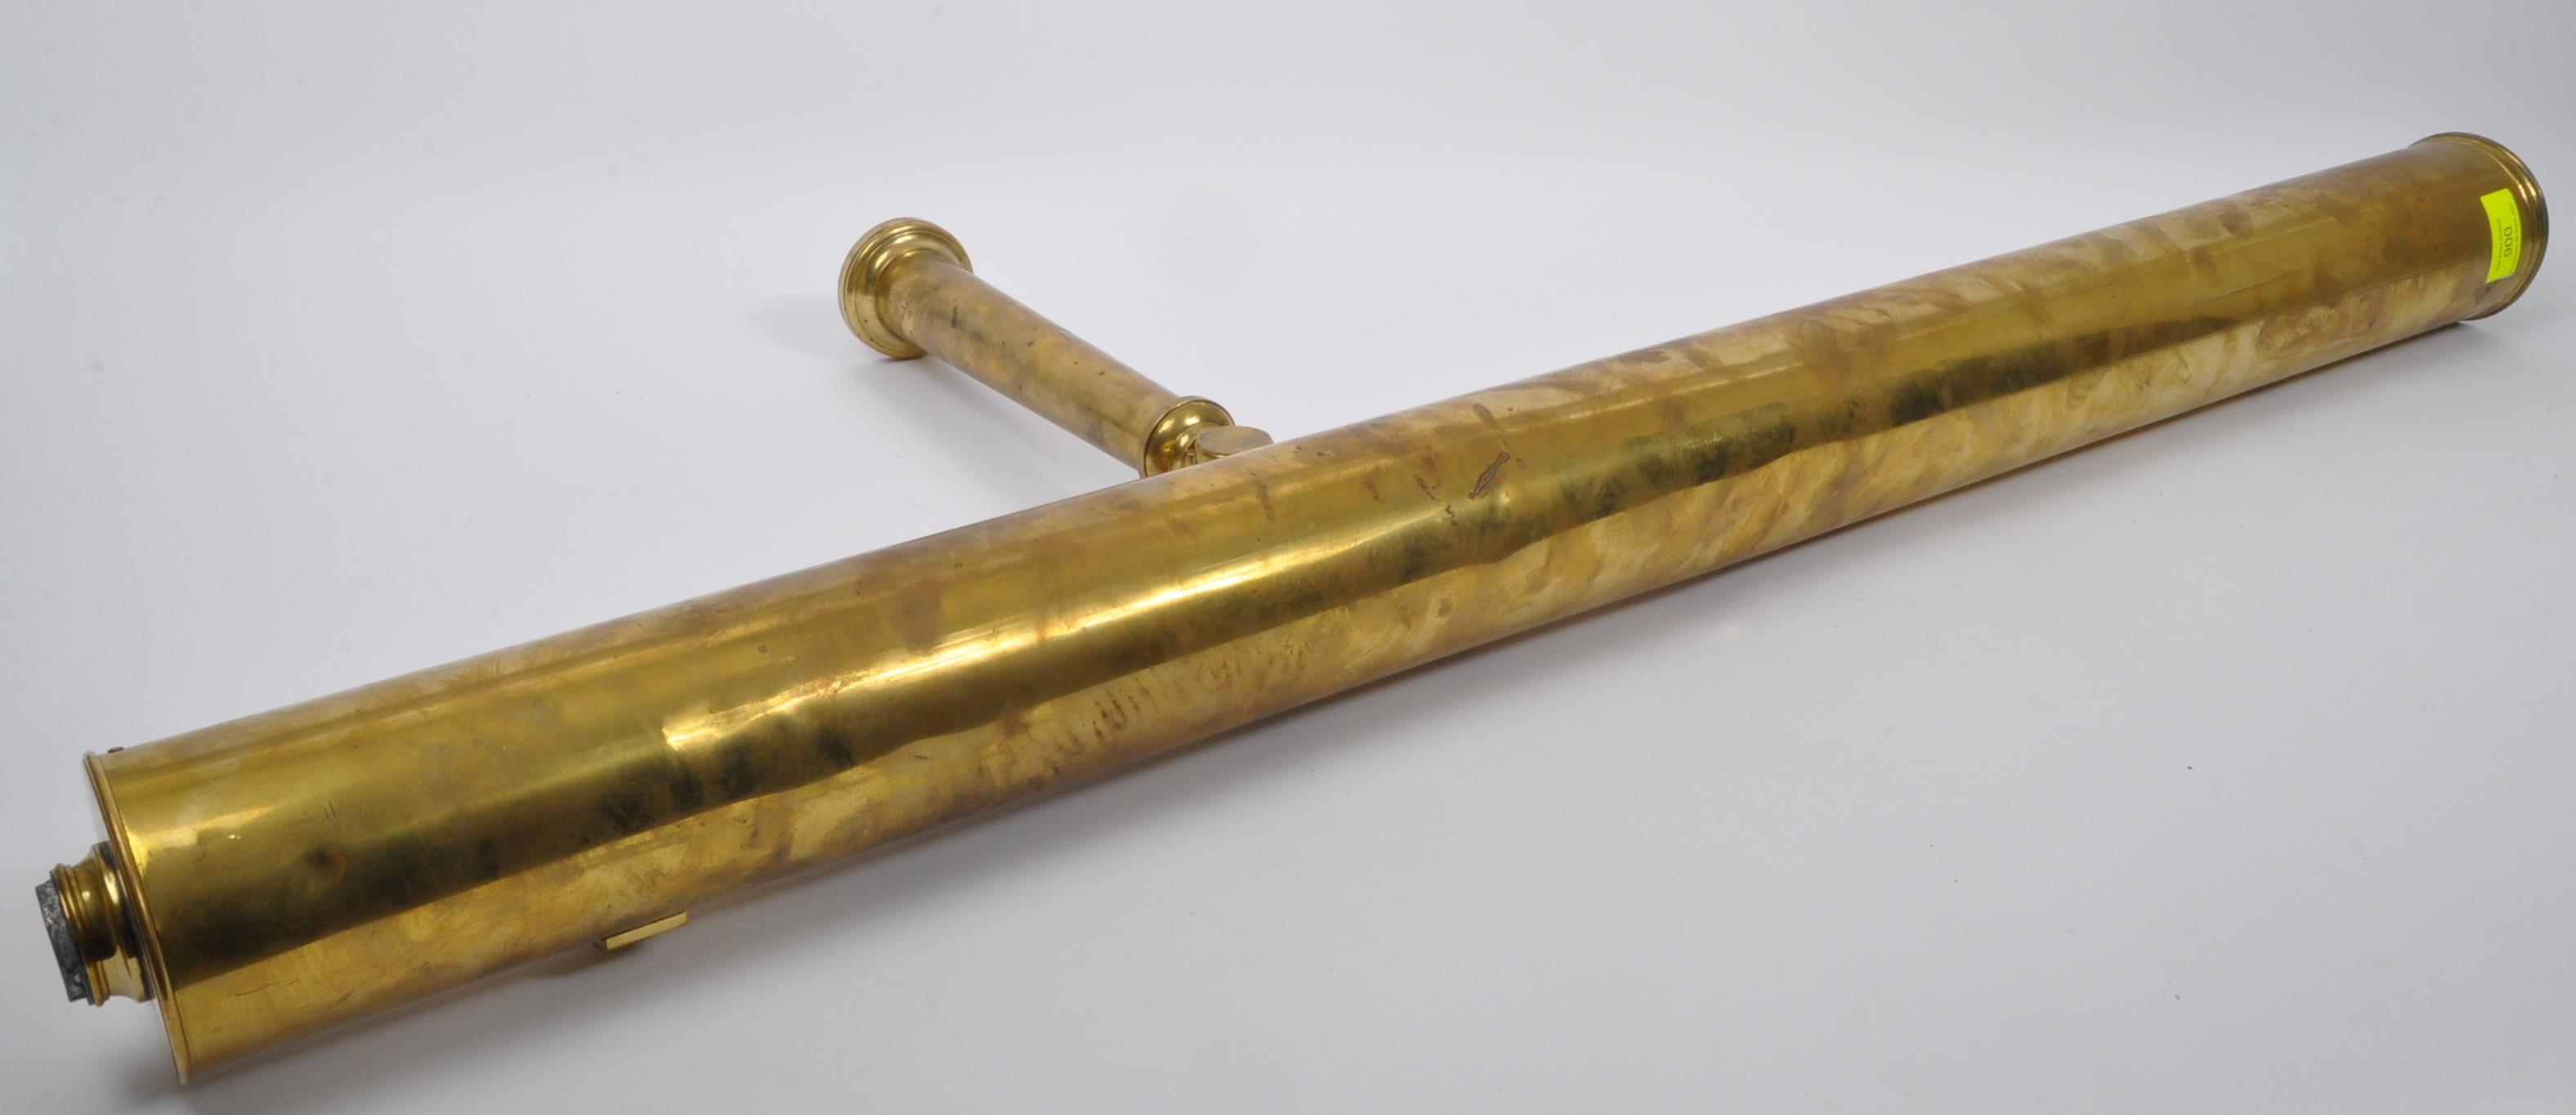 LARGE EARLY 19TH CENTURY BRASS TELESCOPE - Image 2 of 5